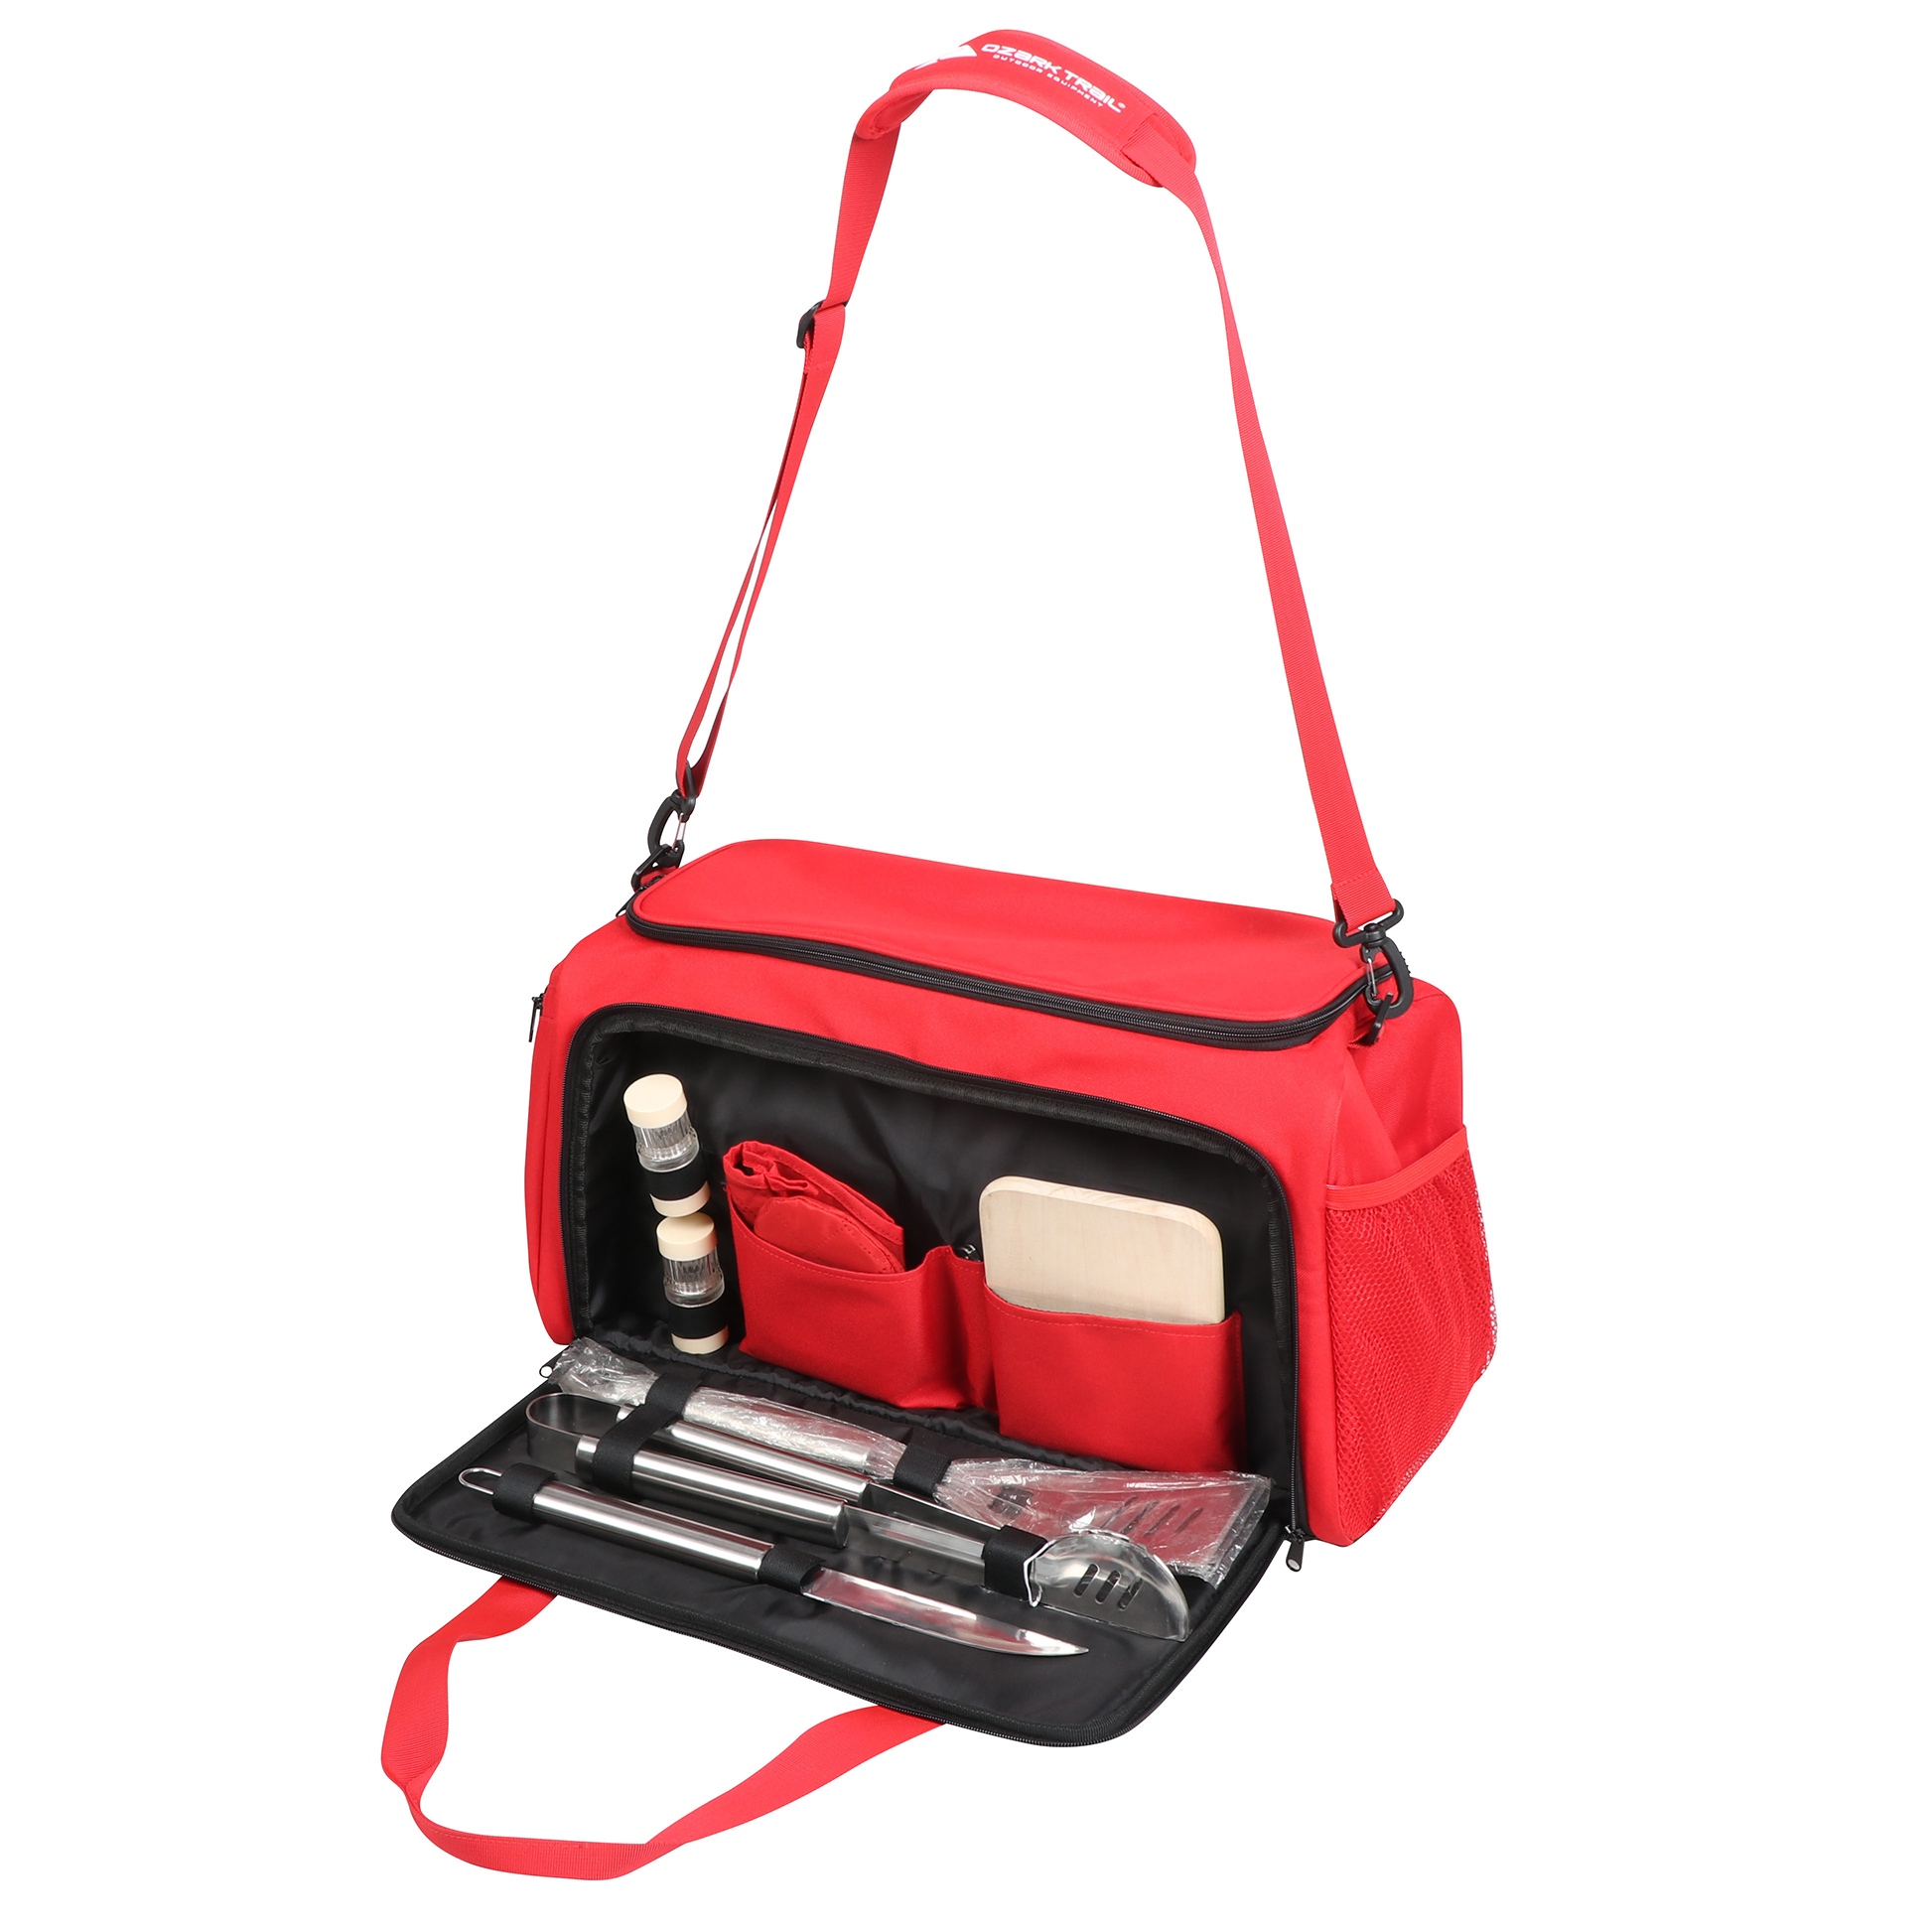 Ozark Trail Soft Sided Tailgate Cooler with Utensils,Red